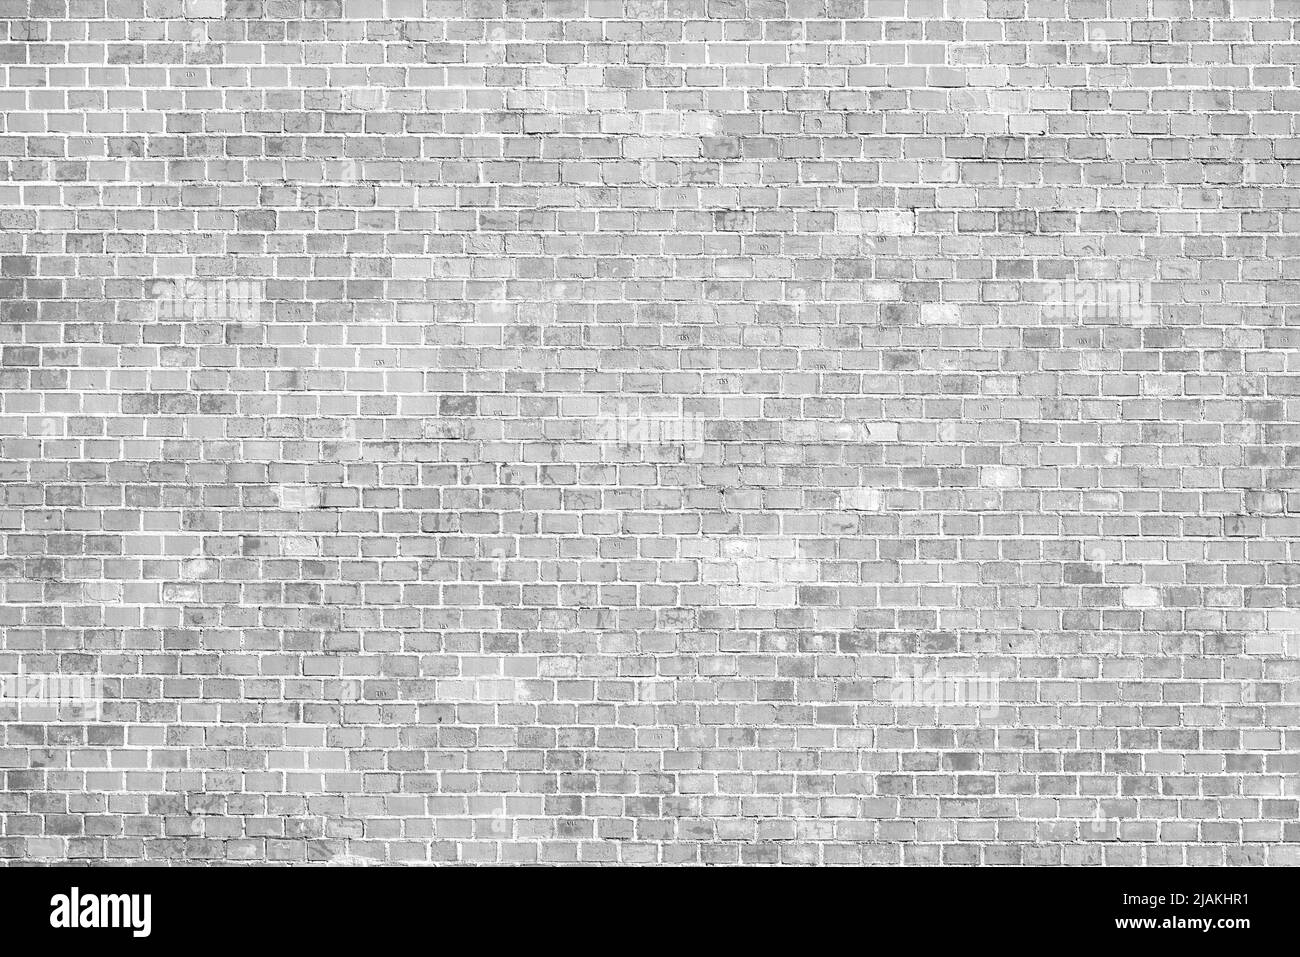 Old white Brick Wall. An ancient fortress. Medieval red brick building. Big Brick wall background texture. Stock Photo